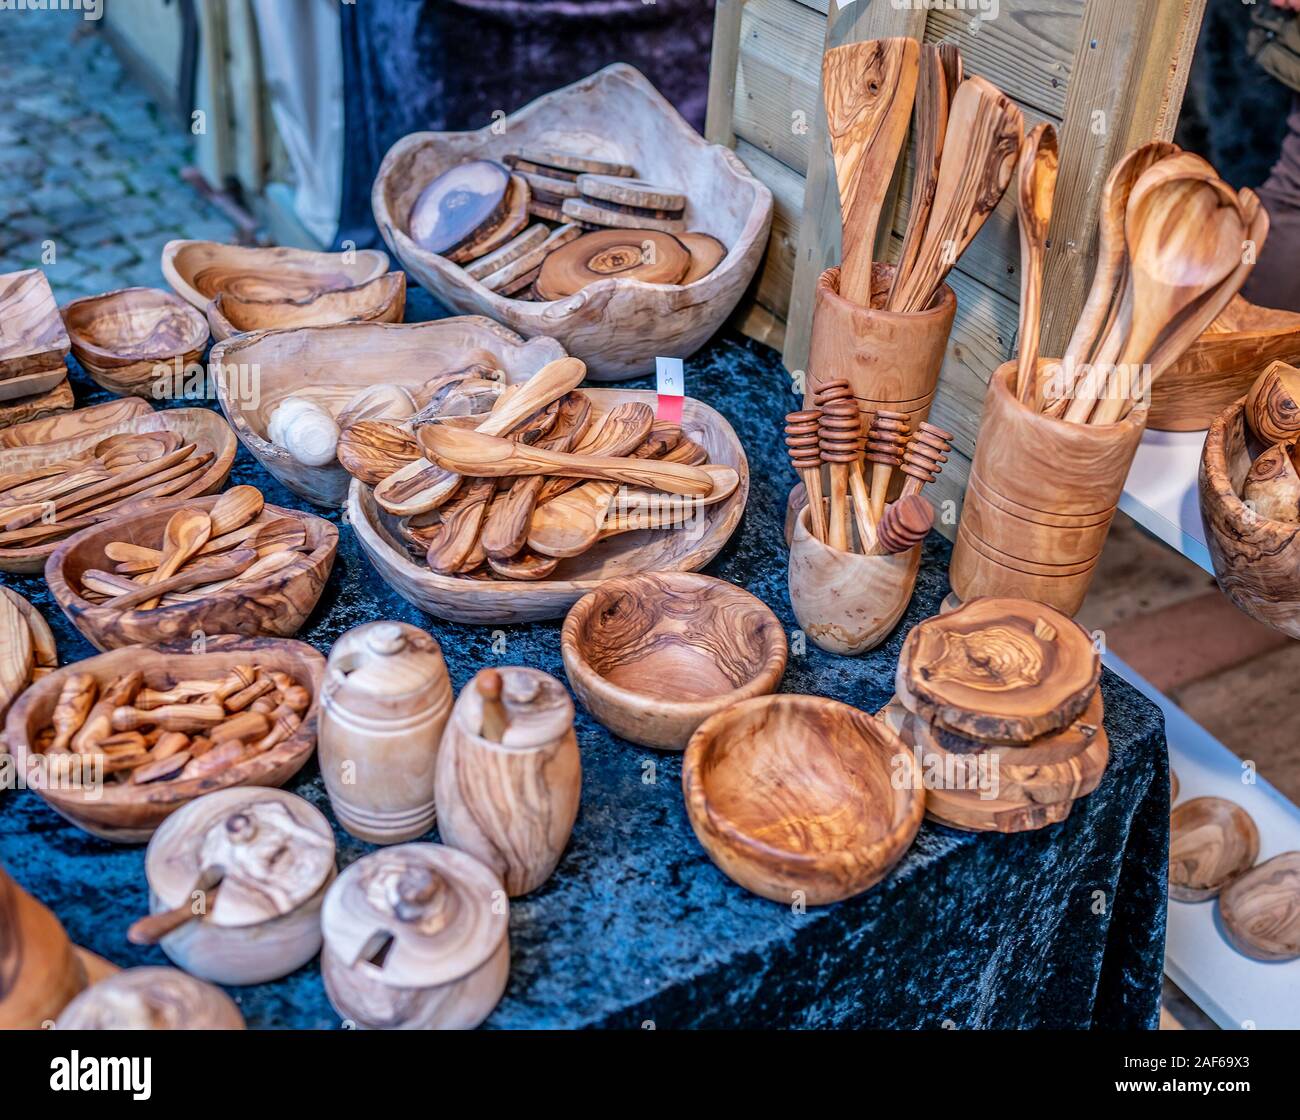 https://c8.alamy.com/comp/2AF69X3/selective-focus-of-wooden-bowls-utensils-and-kitchen-products-on-display-and-for-sale-at-the-2019-christmas-market-in-maastricht-netherlands-2AF69X3.jpg